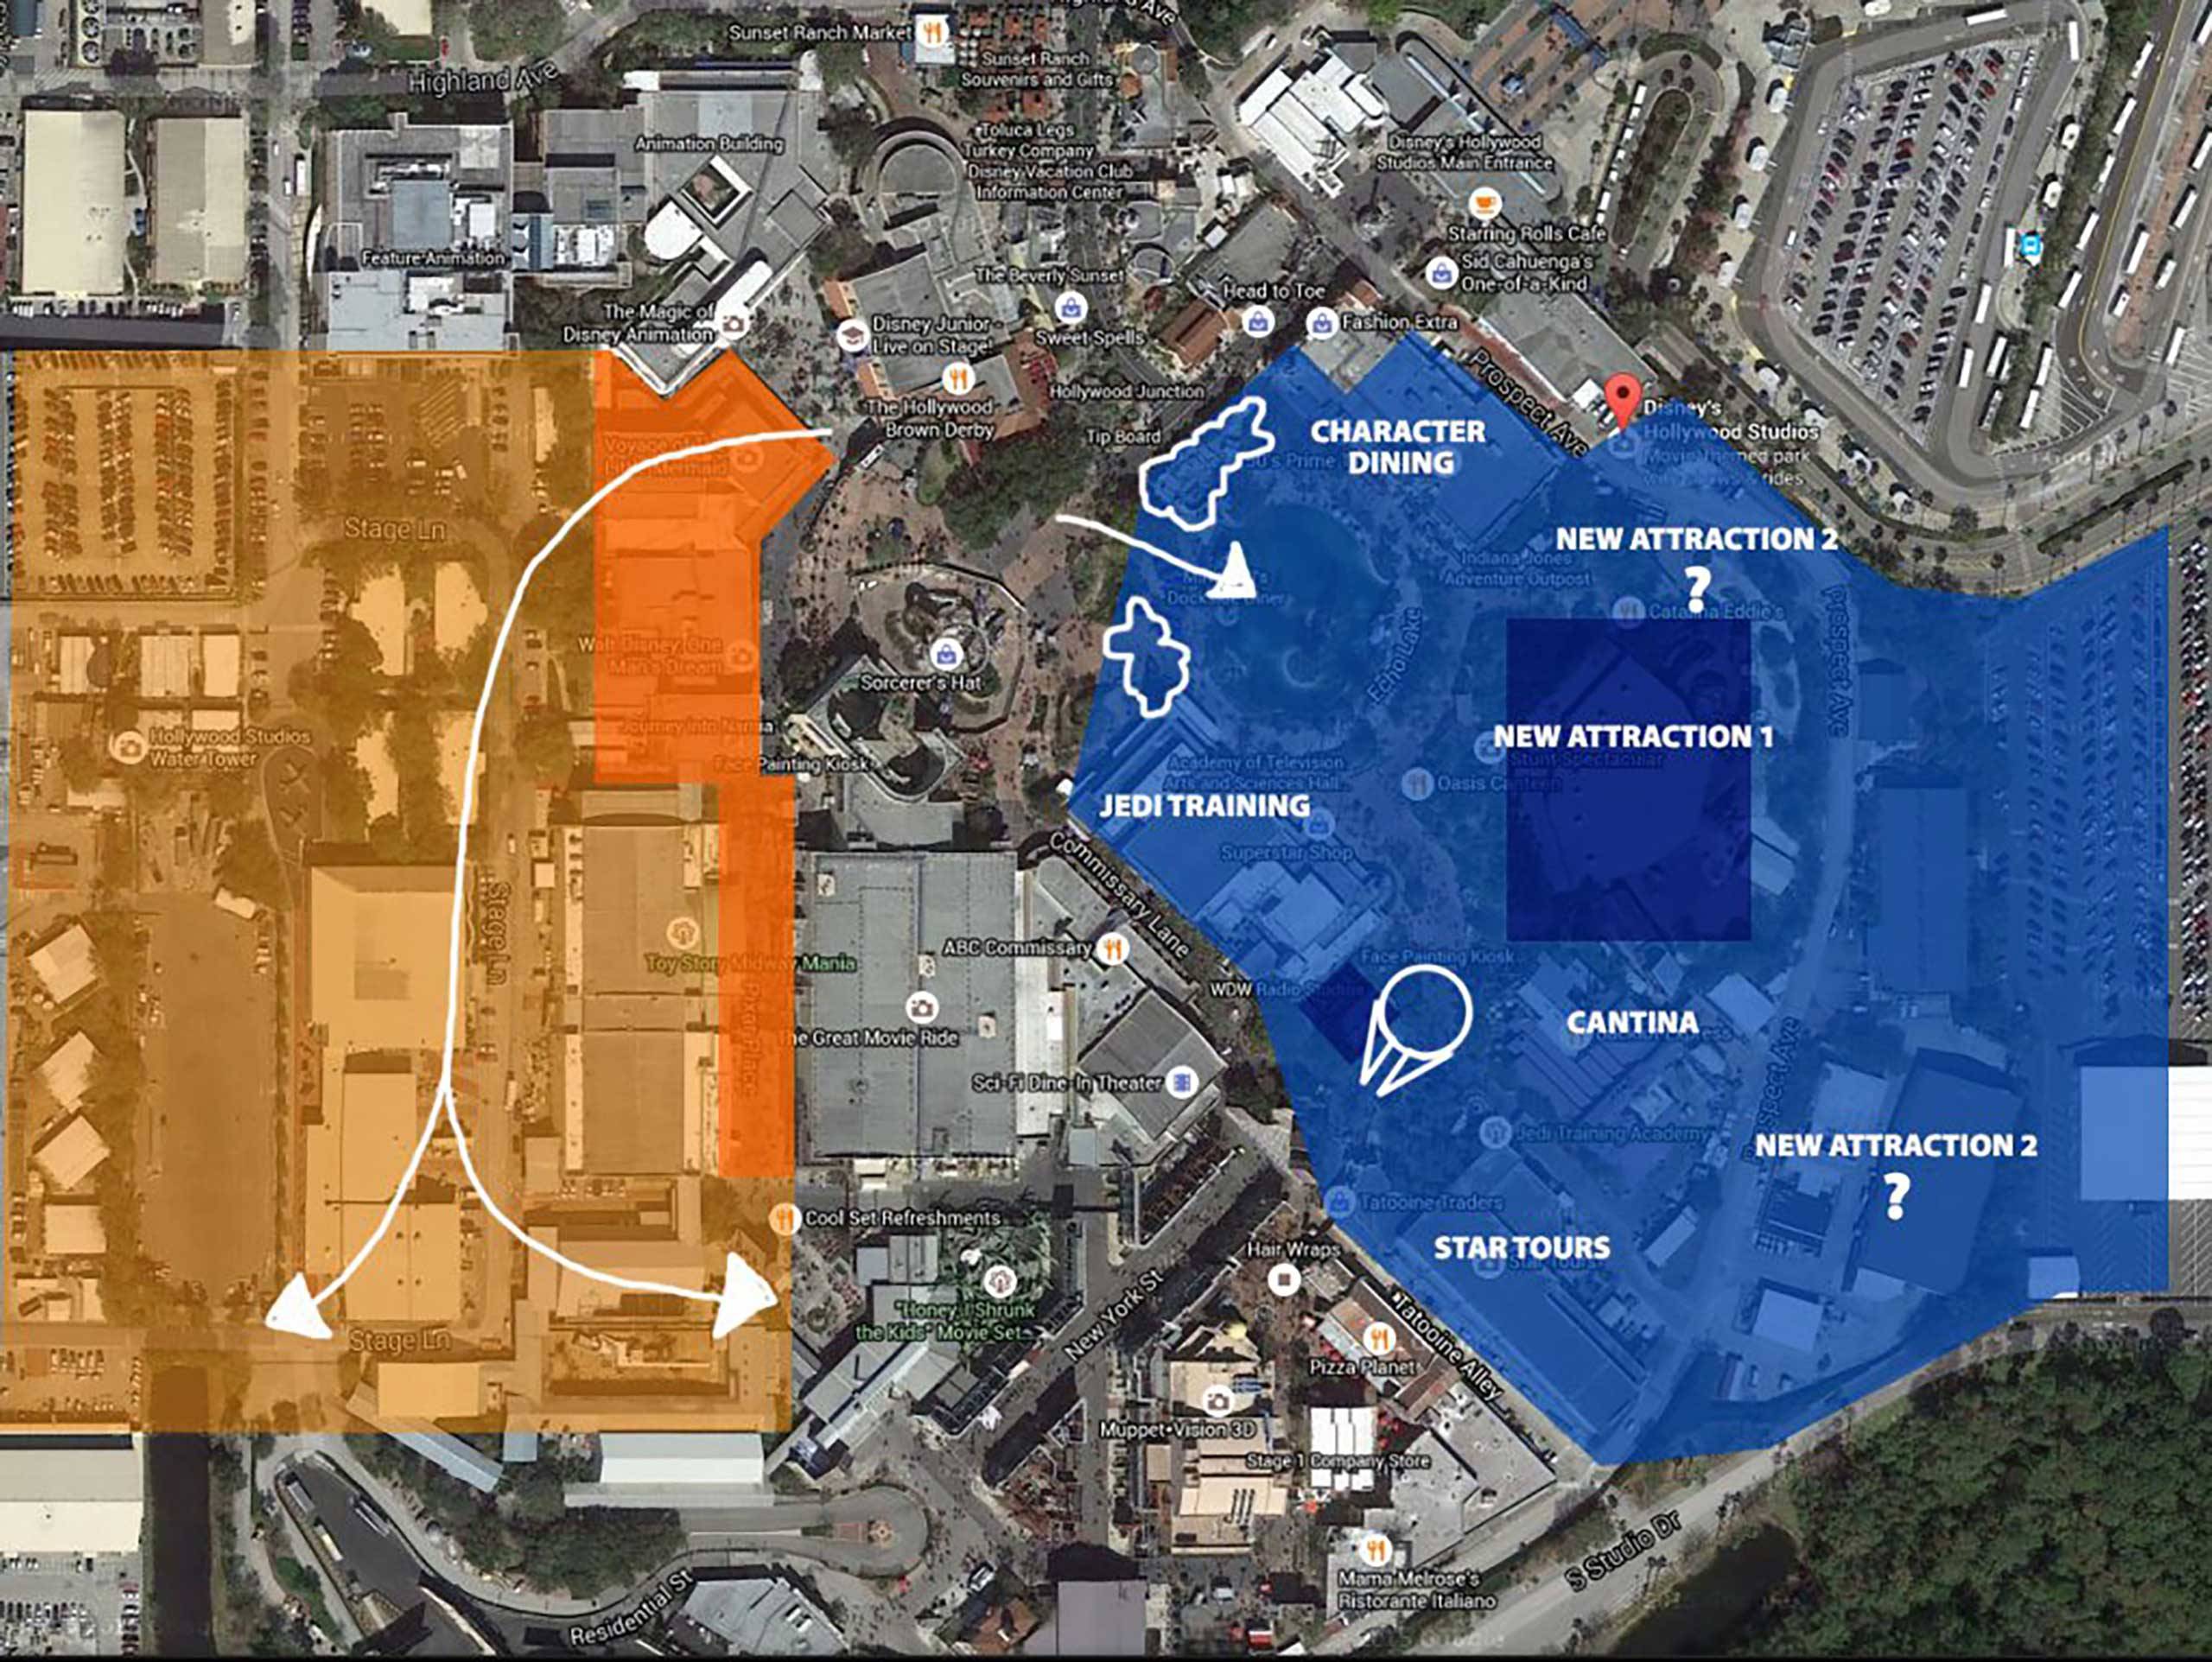 Possible location of Star Wars Land and Toy Story Land at Disney's Hollywood Studios. By Ignohippo.